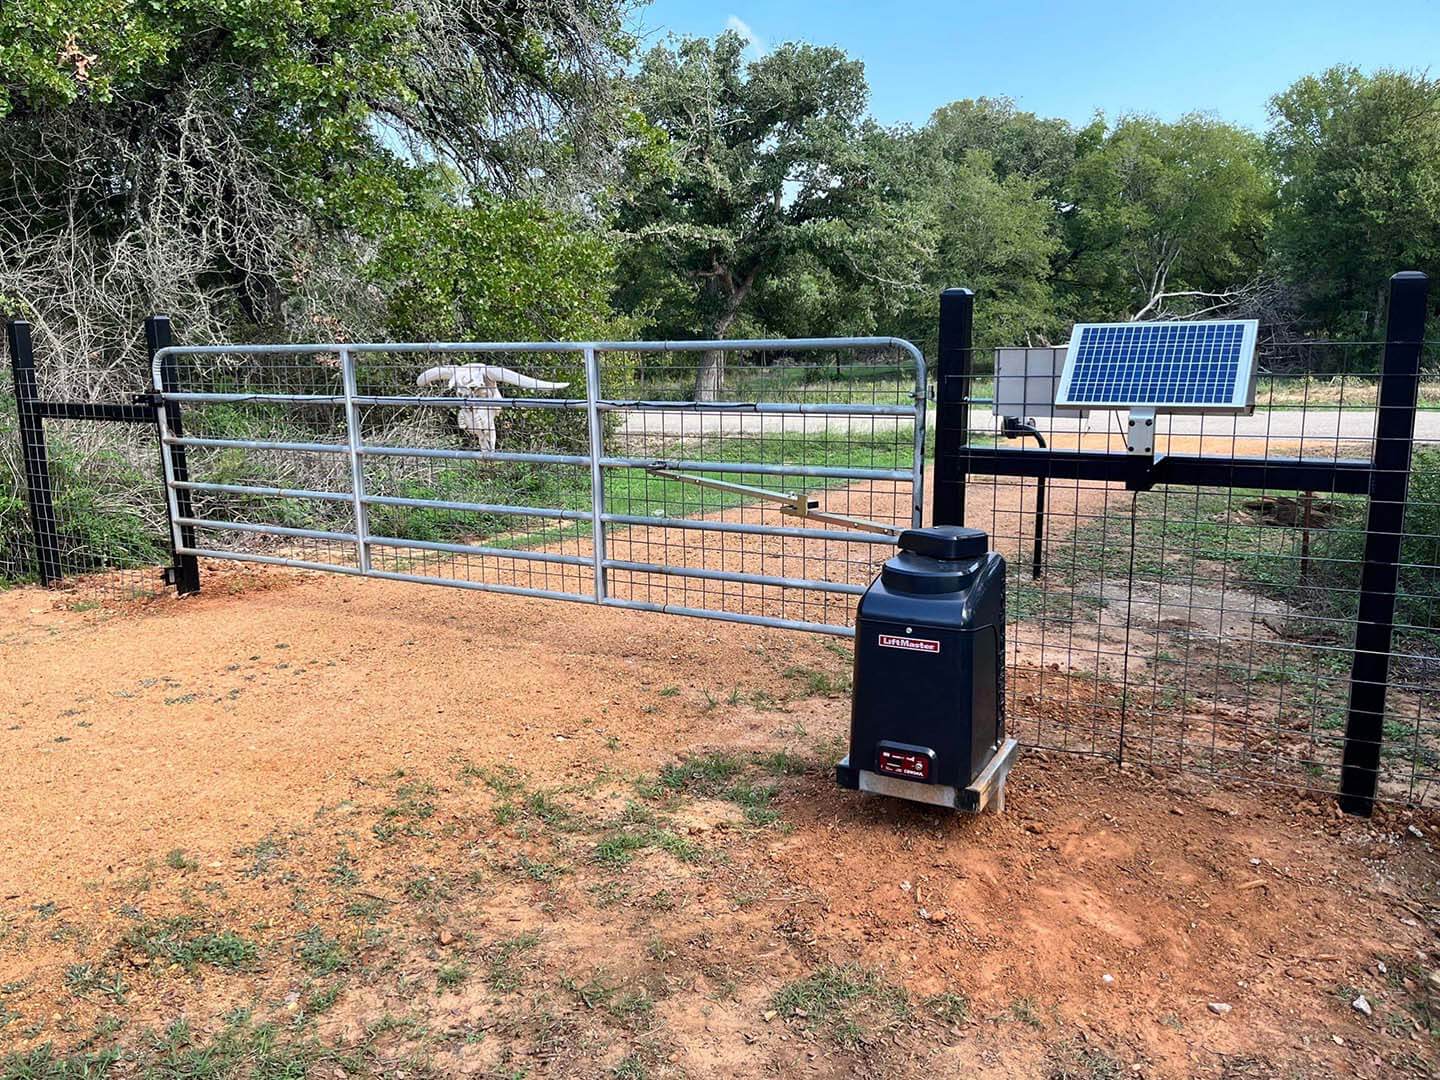 Central Texas Access Control Gate System